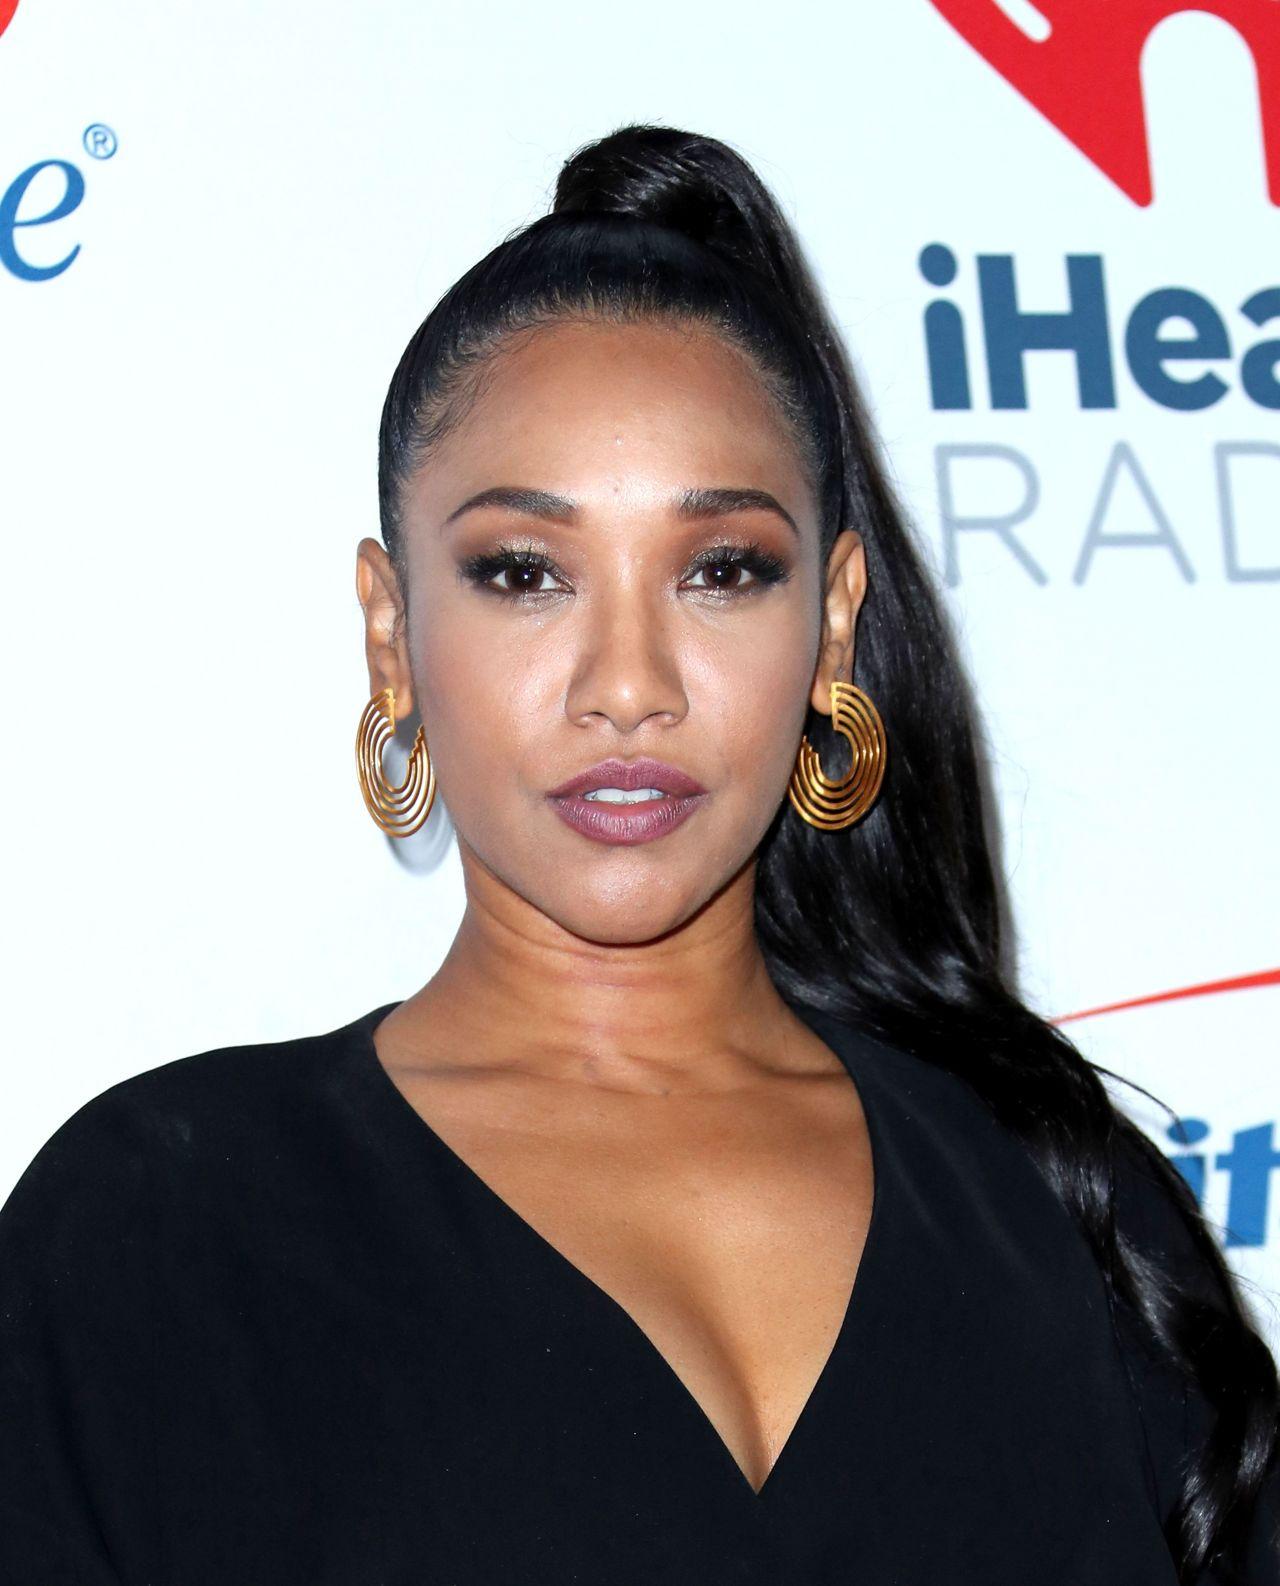 70+ Hot Pictures Of Candice Patton Who Plays Iris West In Flash TV Series 72